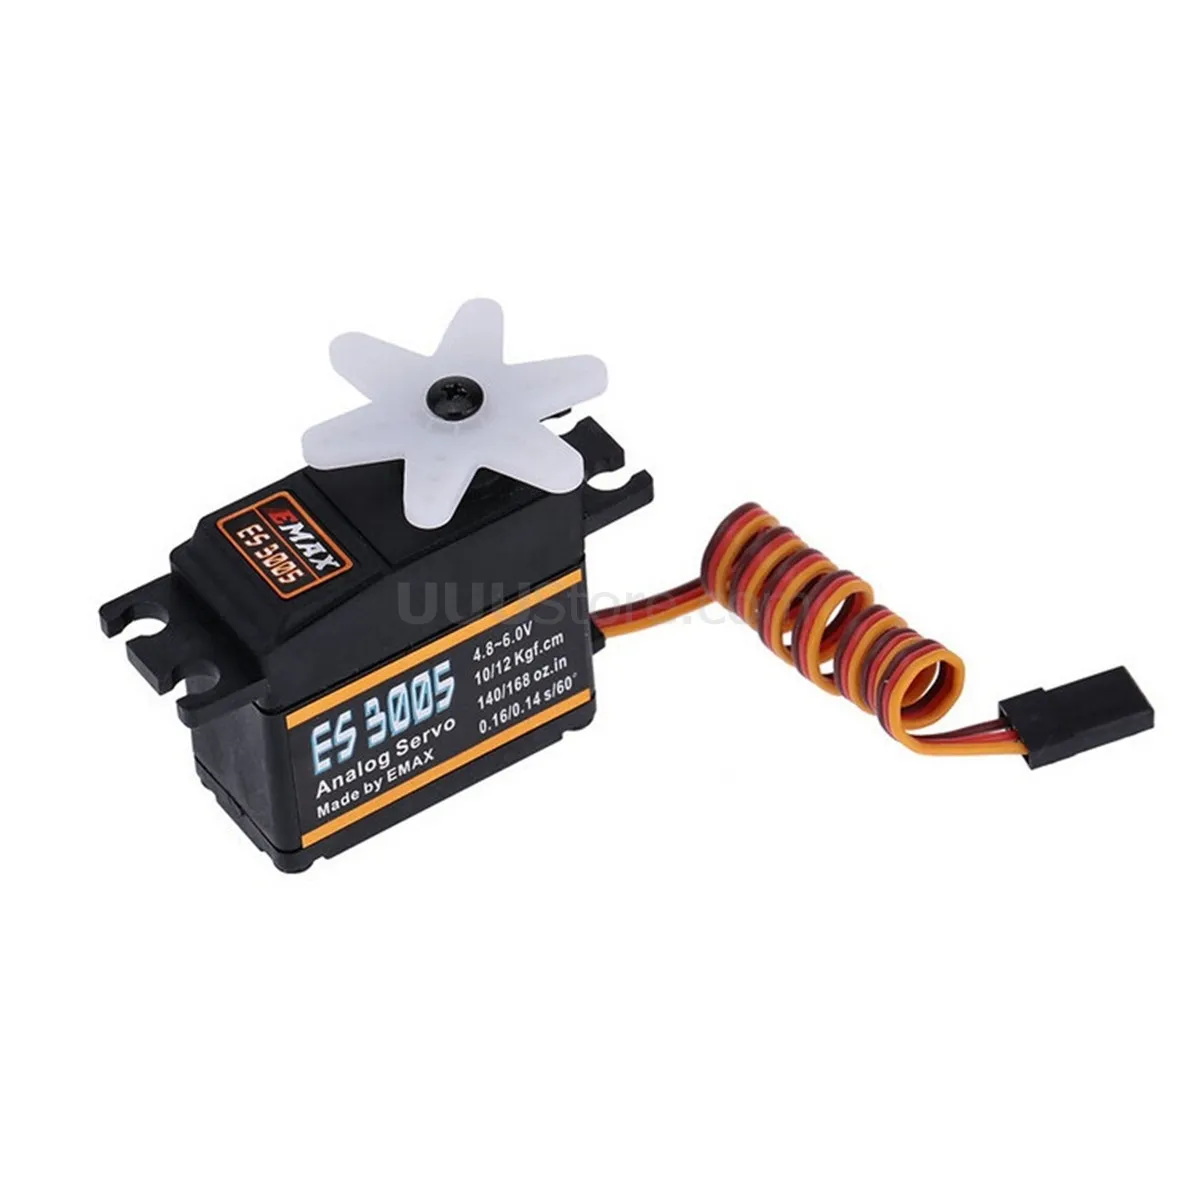 4pcs EMAX ES3005 Analog Metal Waterproof Servo with Gears 43g servo 13KG torque for RC Car Boat Fixed-wing Copters